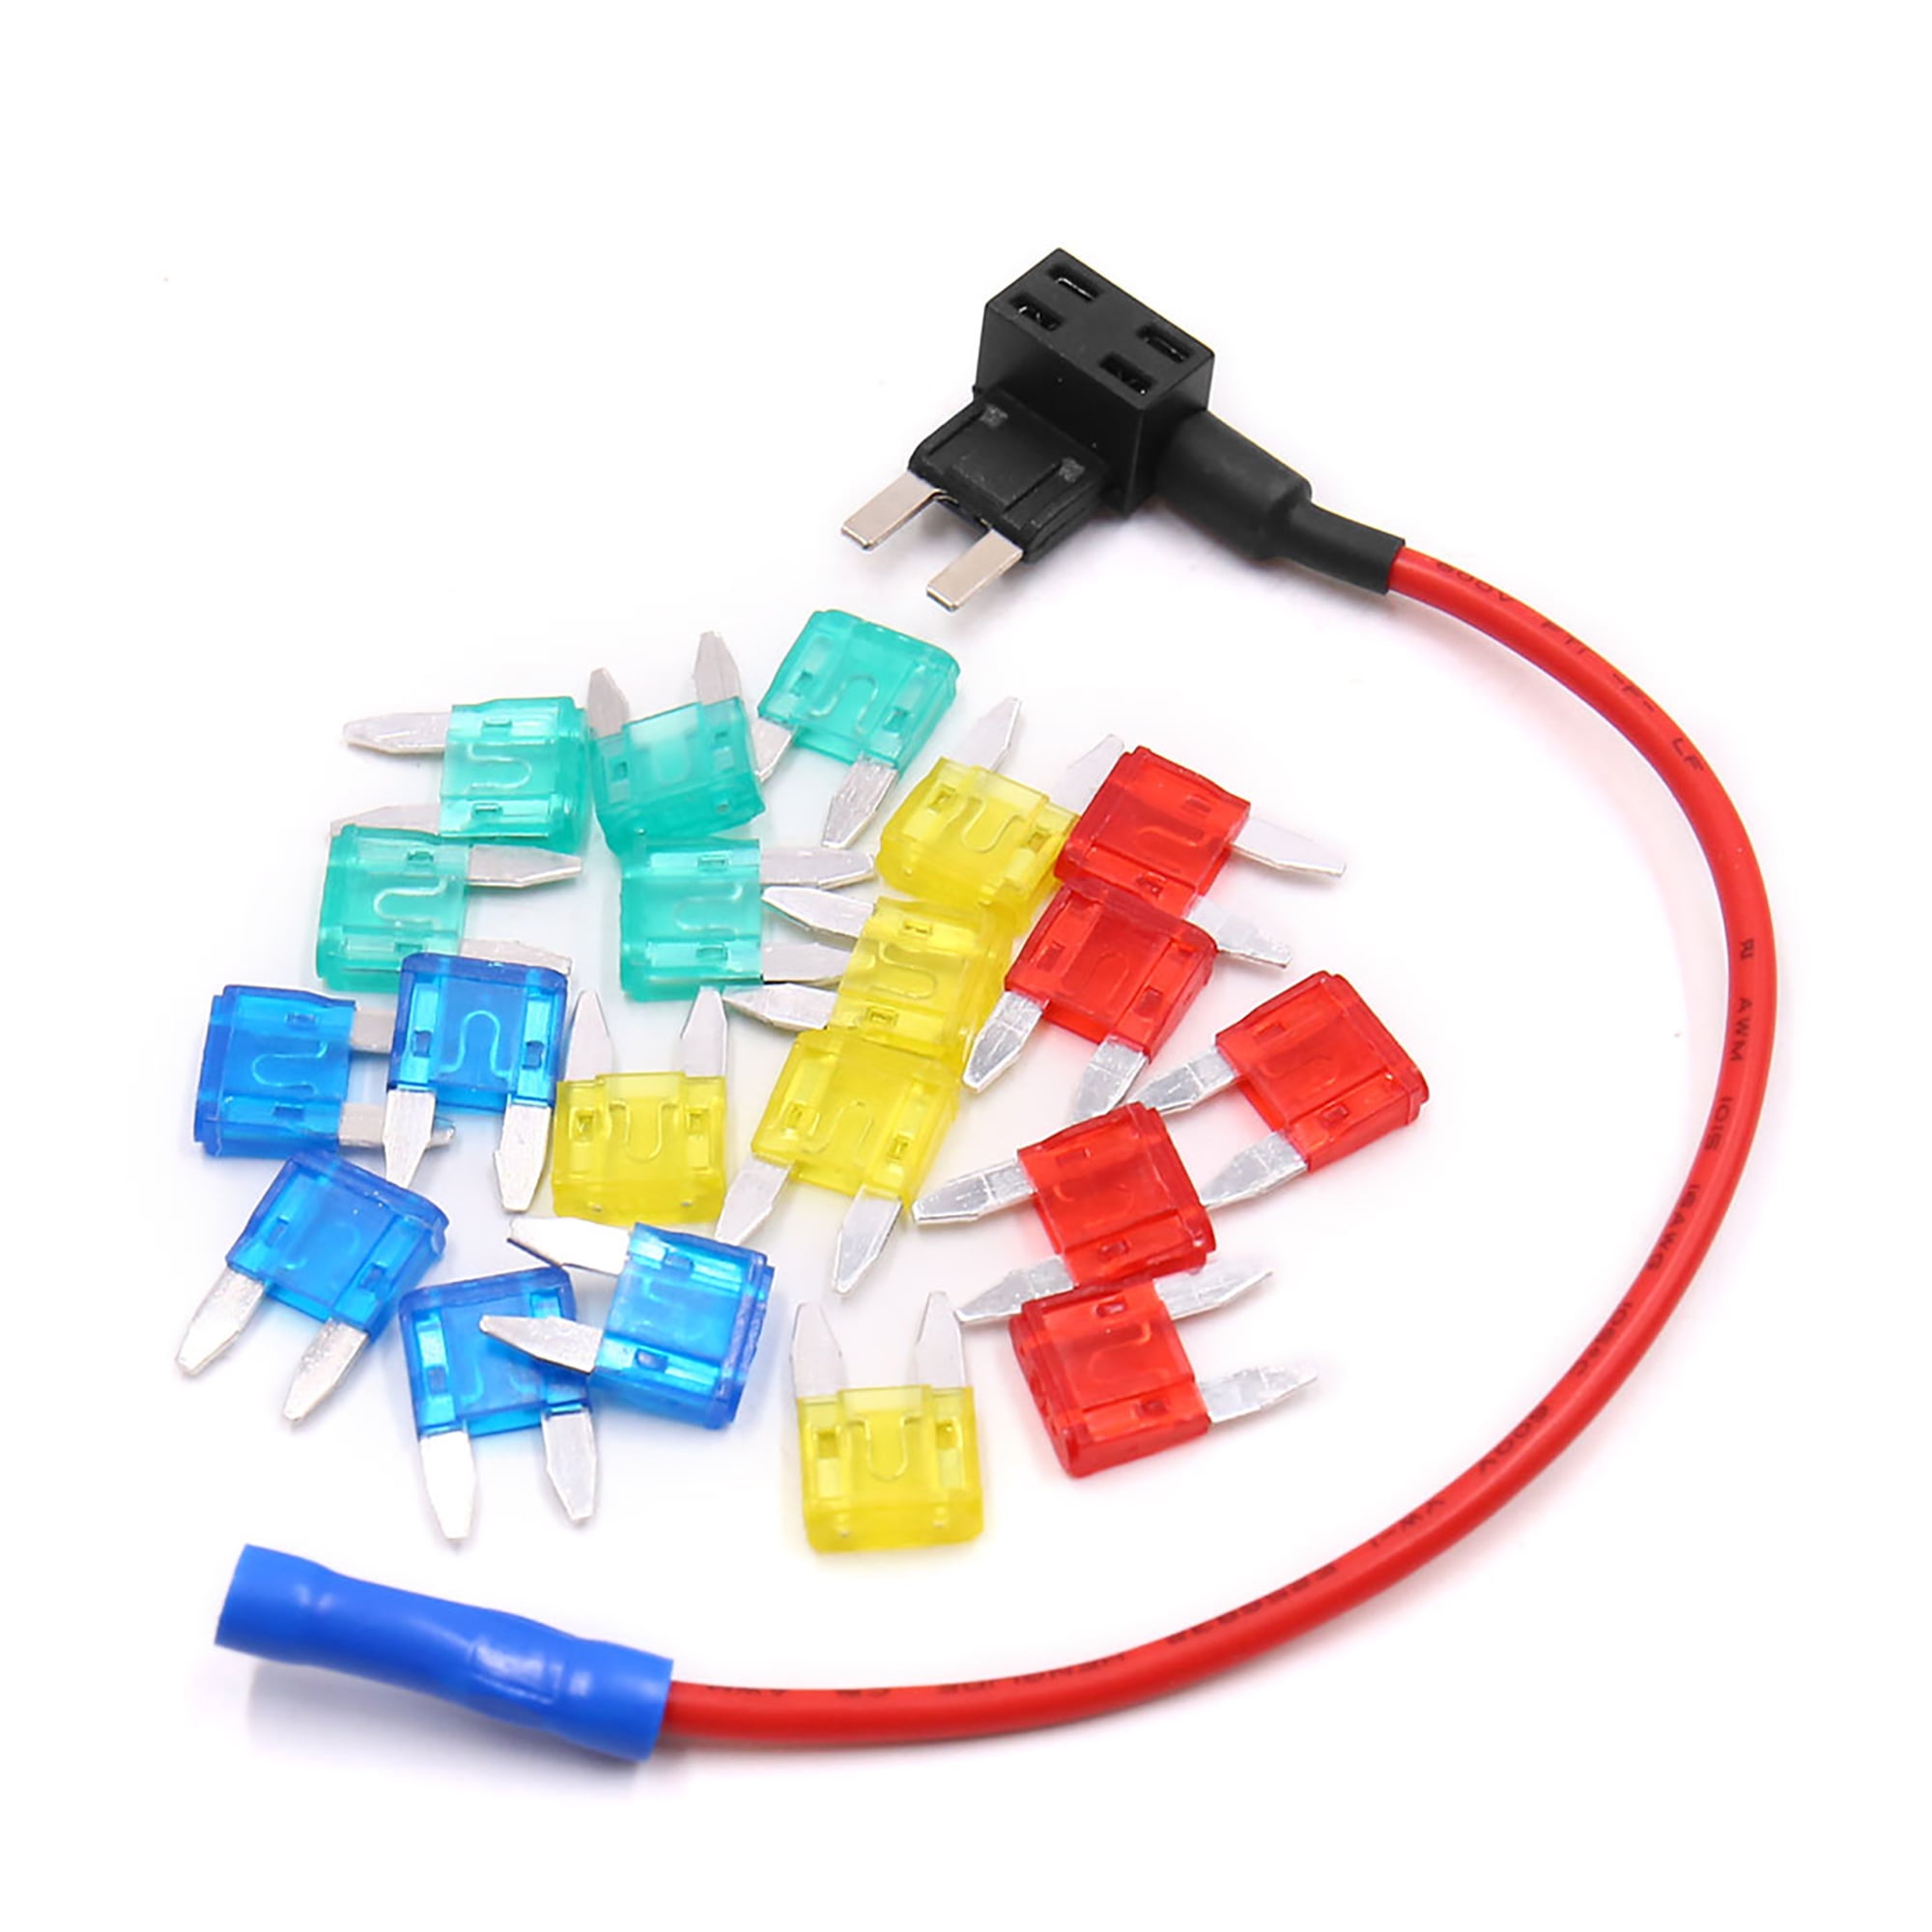 Plastic And Metal Dual-Slot Auto Fuse Adapter With 15A Blade Fuse Micro Mini Car Add A Circuit Fuse Tap 